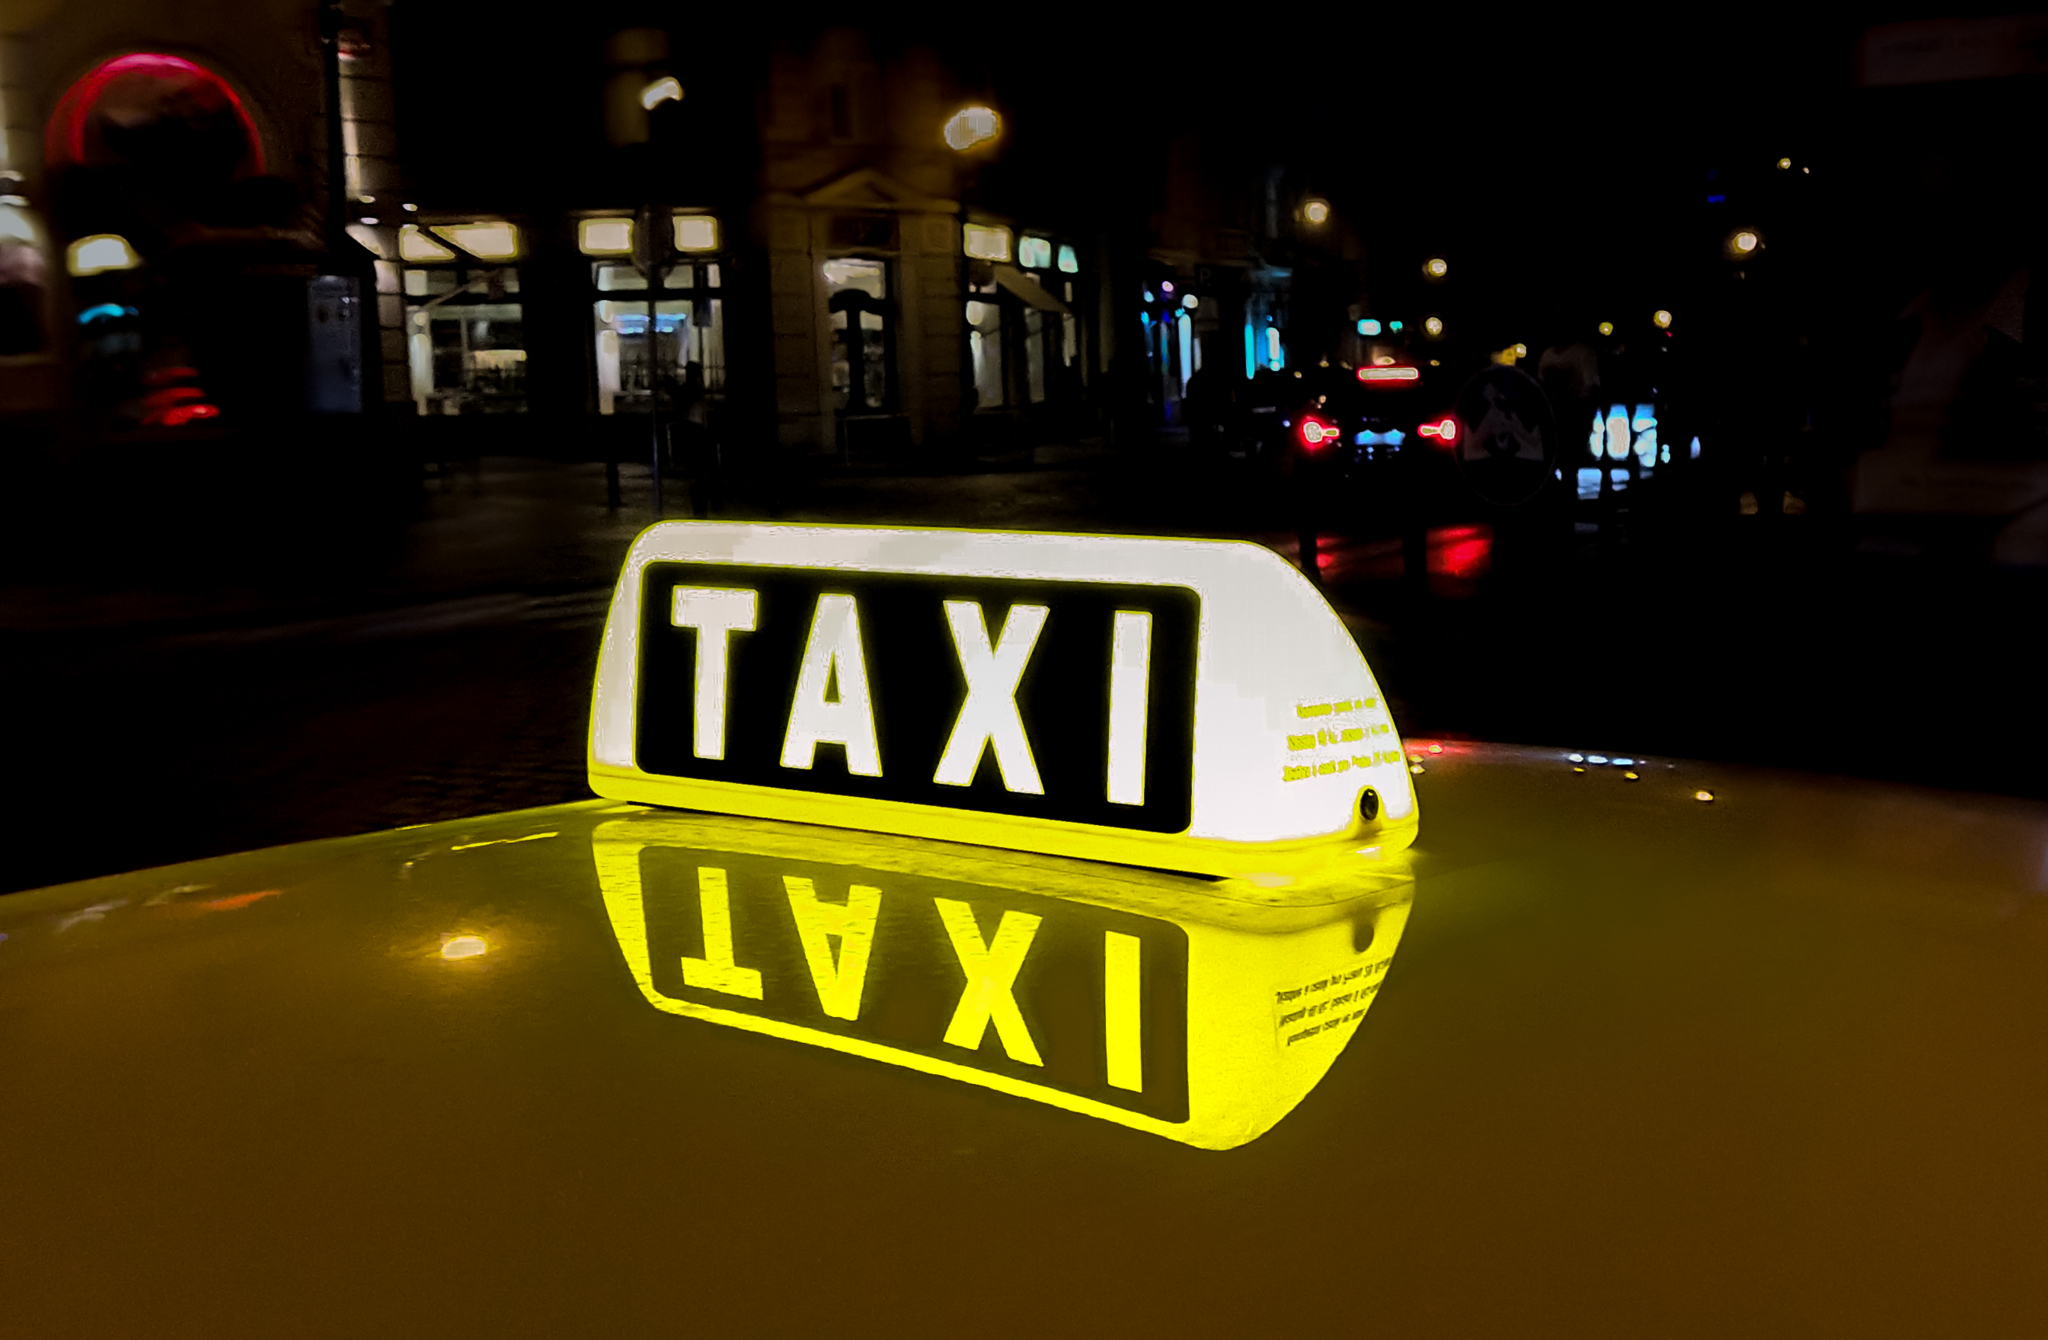 City-Wide Taxi - Taxis